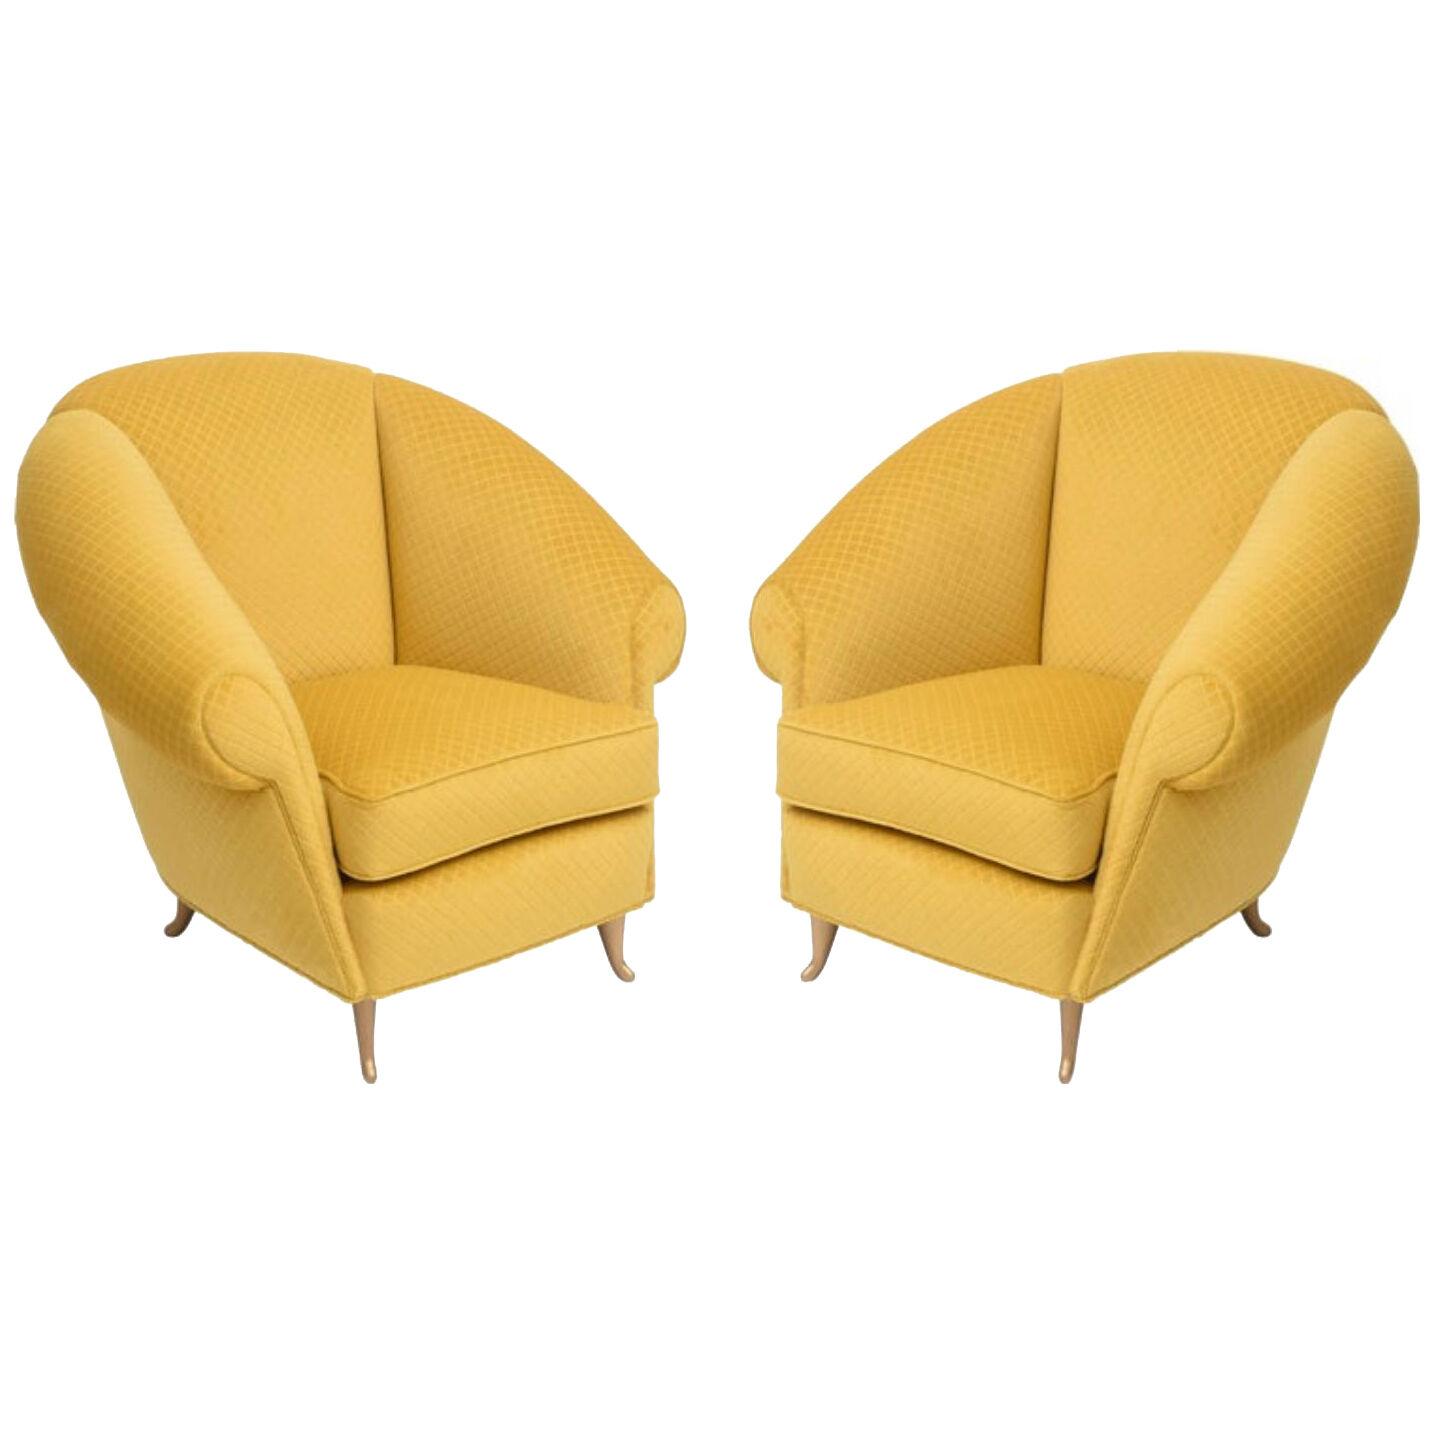 Pair of Italian Modern Lounge Chairs, Gio Ponti for ISA, Model 12690, 1950's